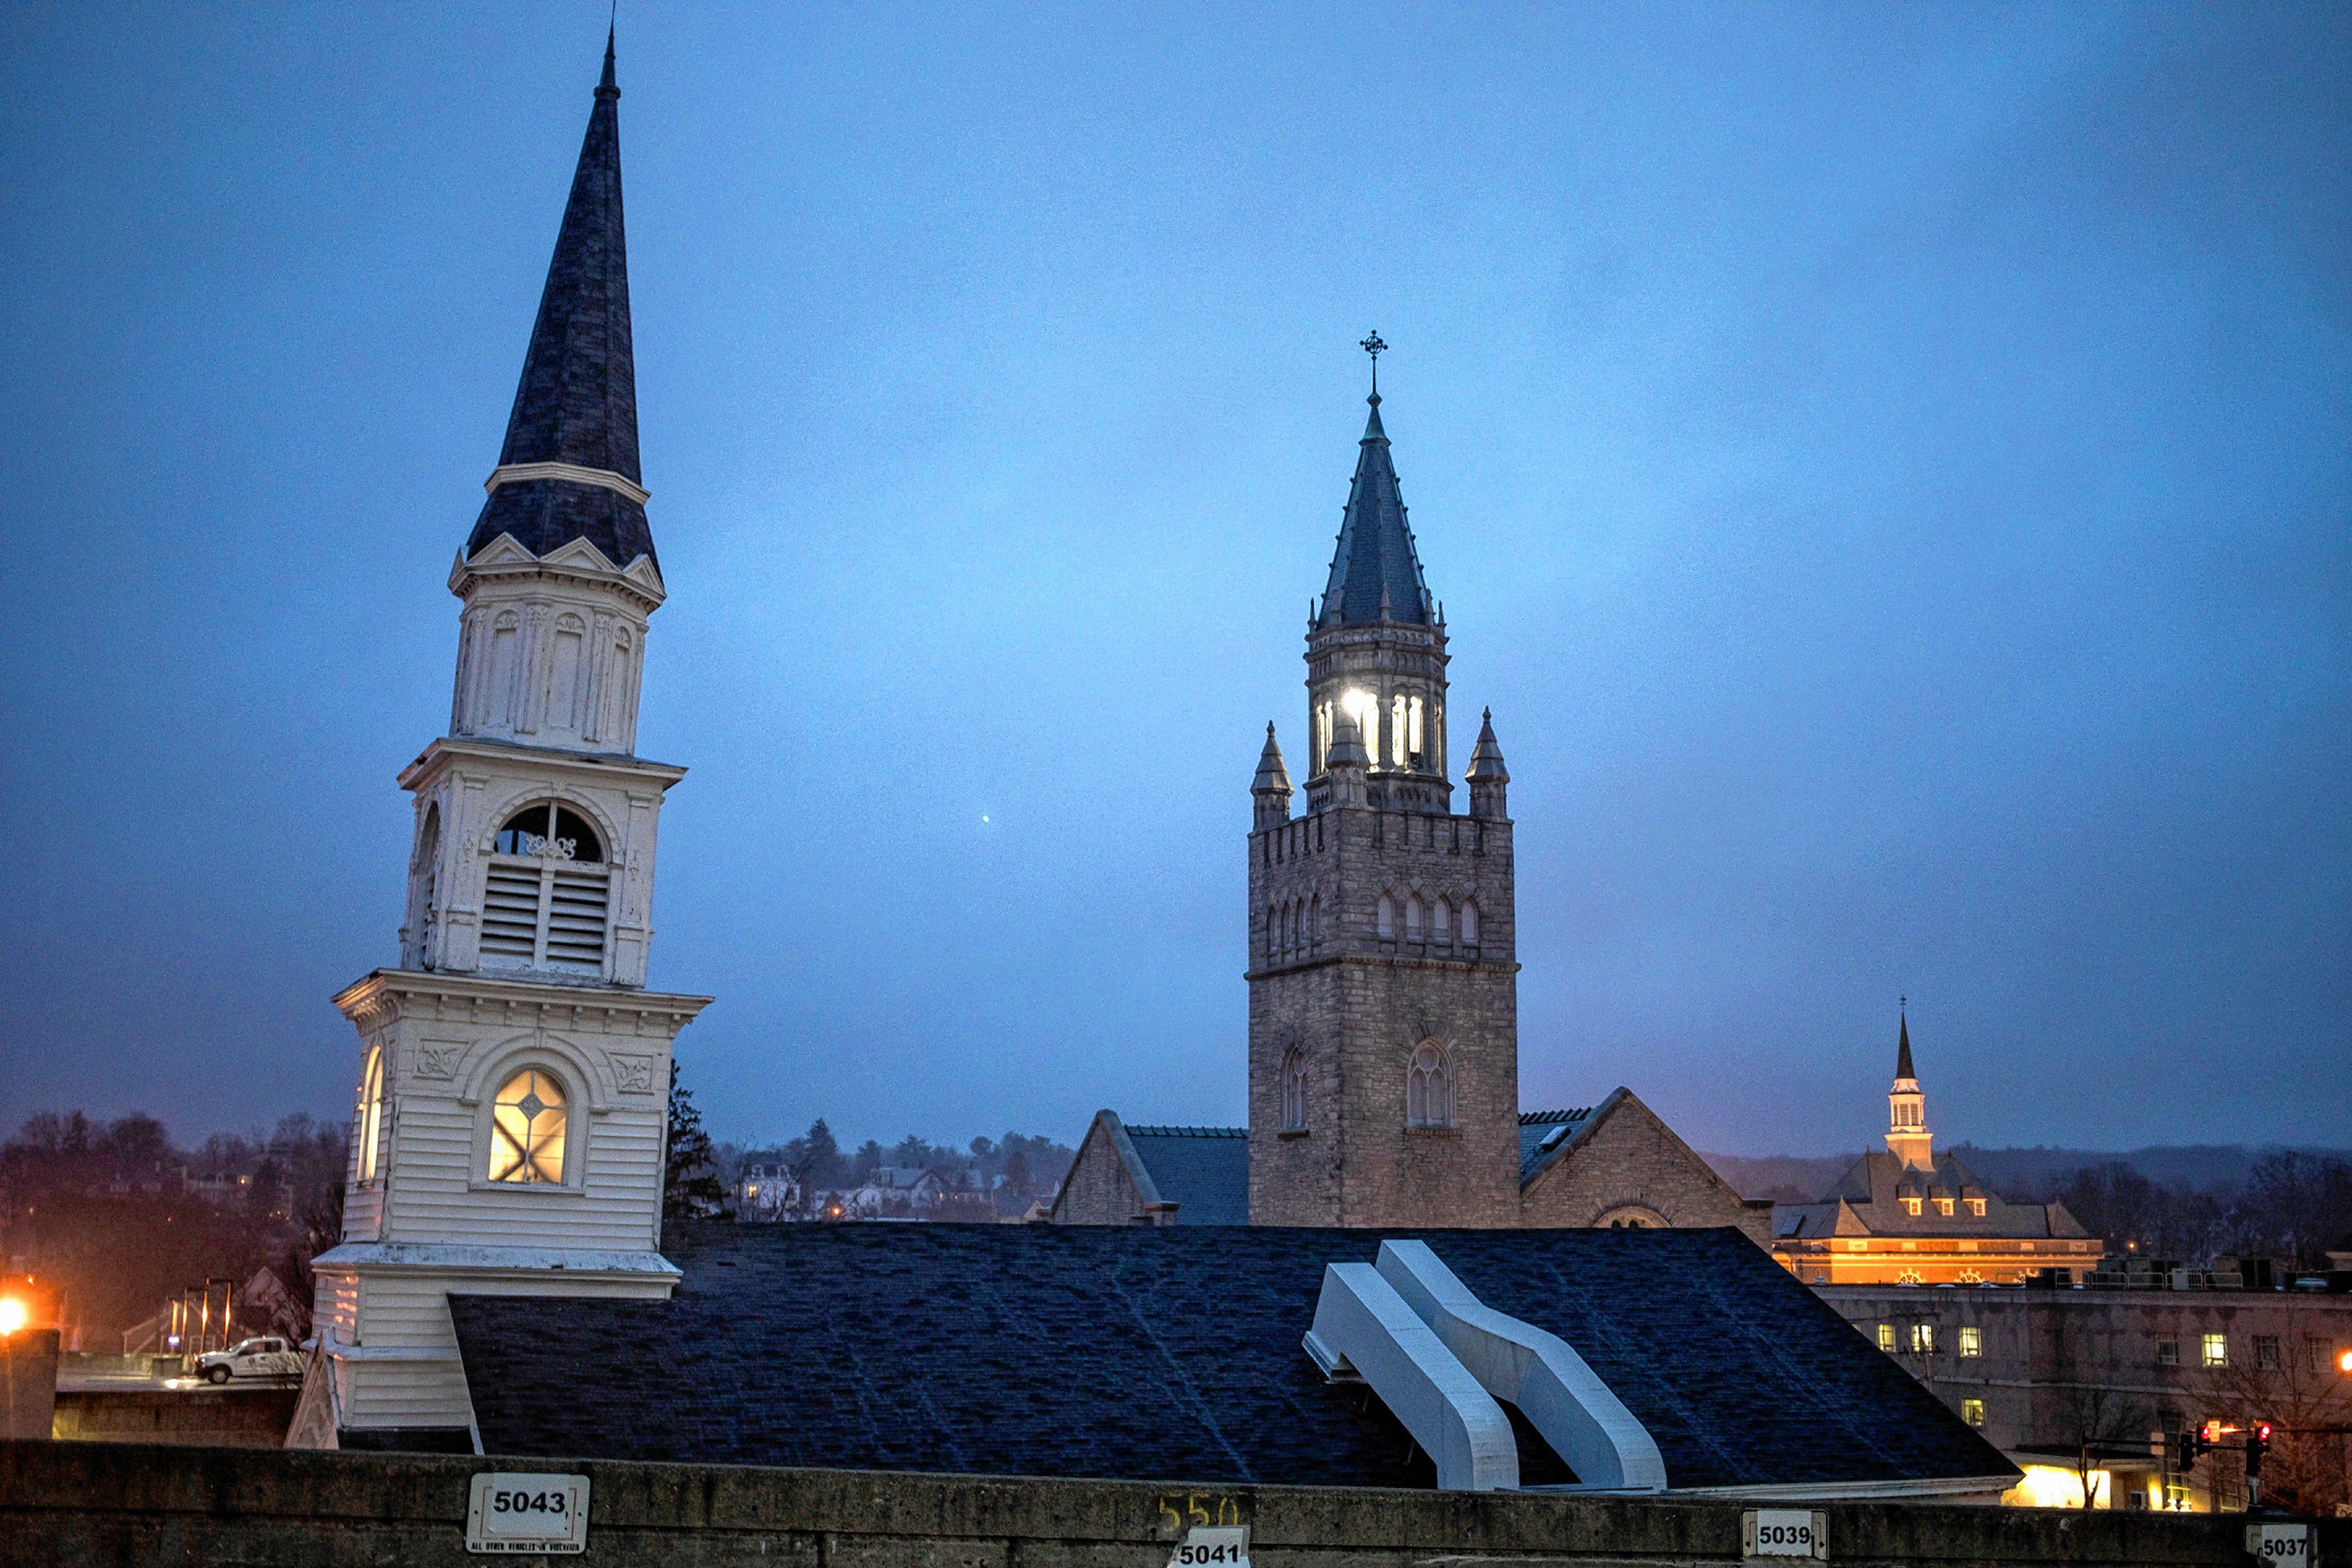 The steeples from Centerpoint Baptist Church (left) and The First Church of Christ, Scientist in downtown Concord on Thursday evening, April 19, 2019.